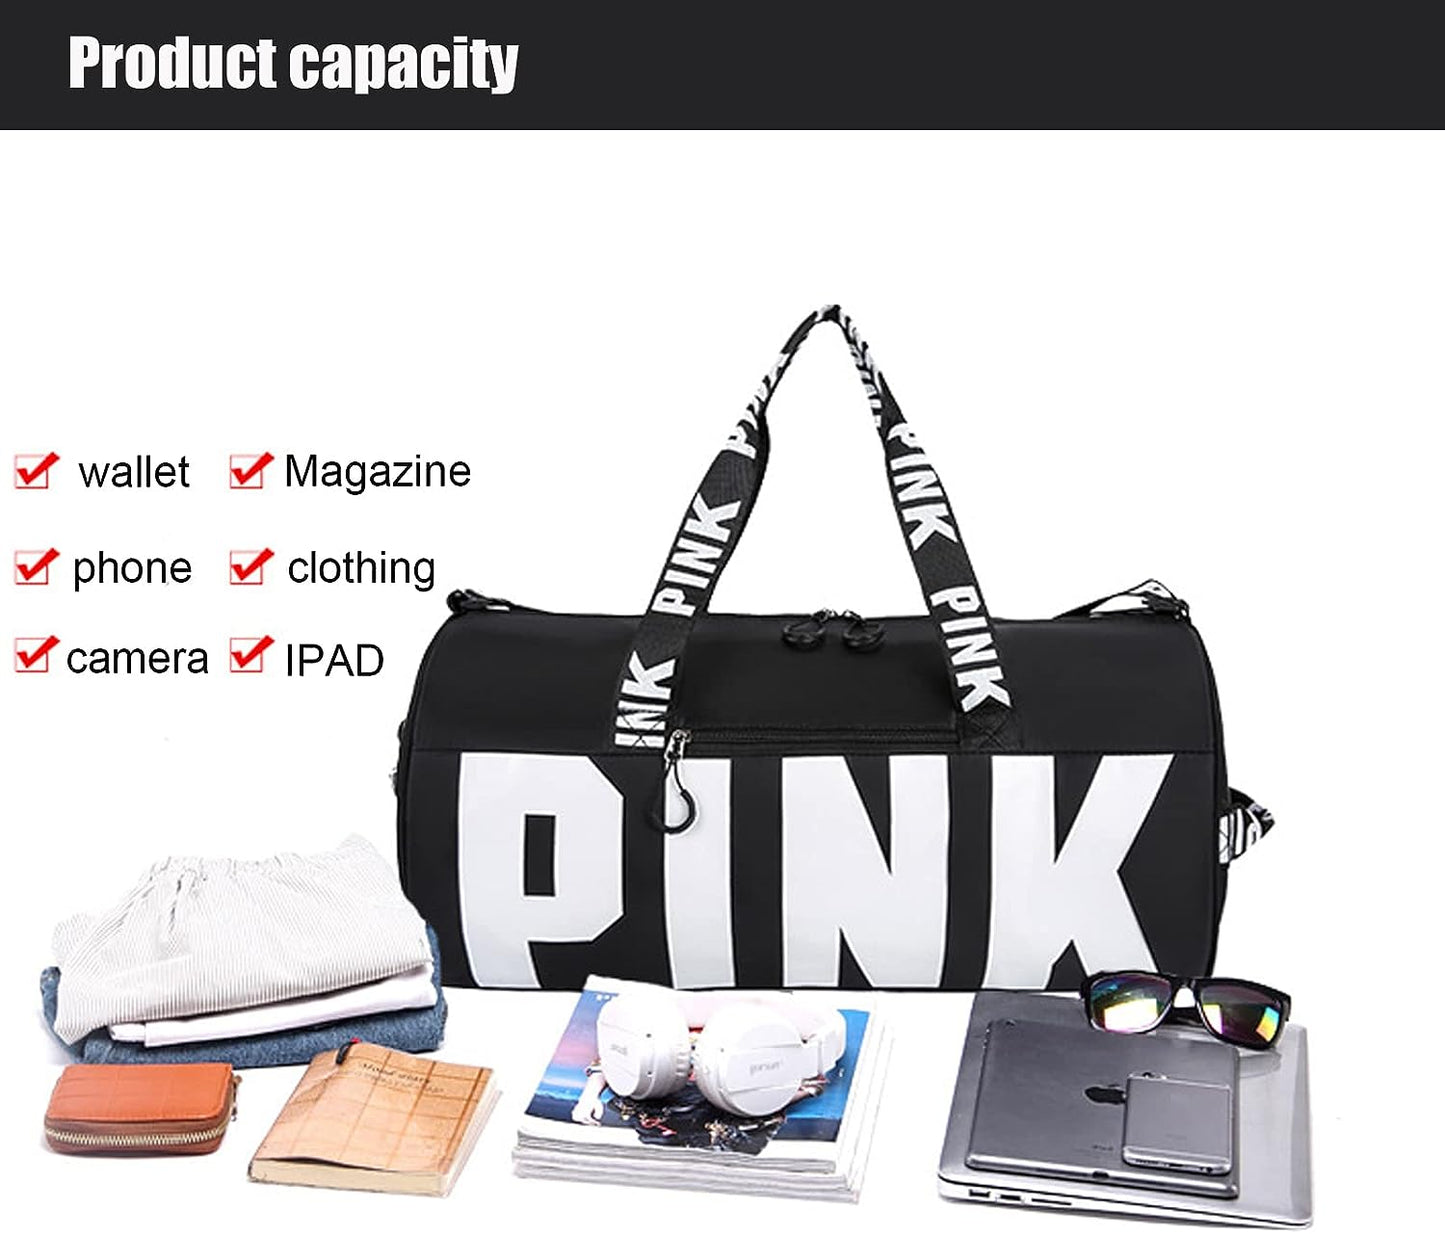 NUMBER 1 HiGropcore Sports Gym Bag, Large Capacity Travel Duffel Bag for Gym with Wet Pocket & Shoe Compartment,Waterproof Pink Duffle Bag Lightweight Multiple Colors